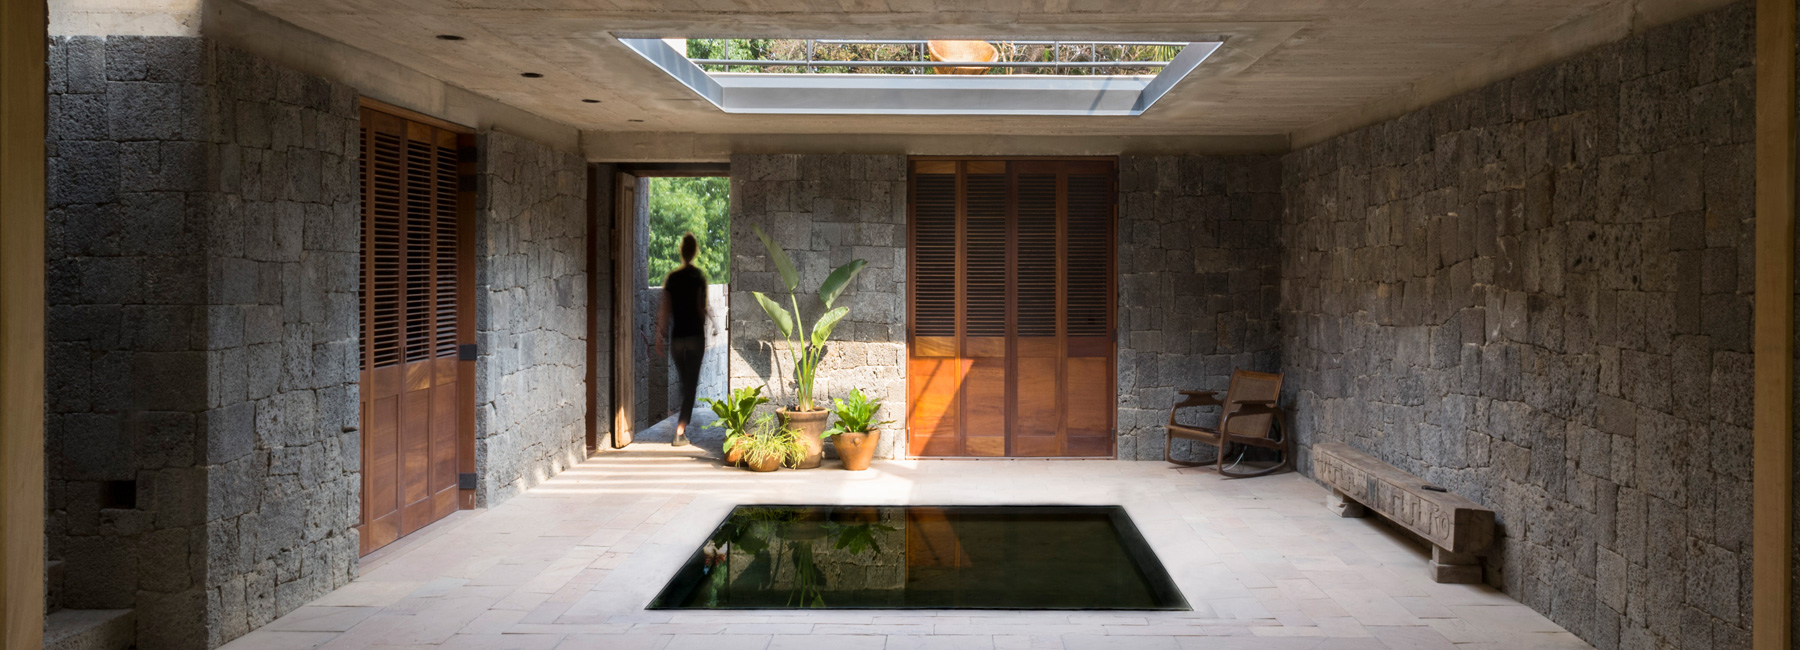 REA designs a stone house with an artisanal touch in the heartland of aztec culture